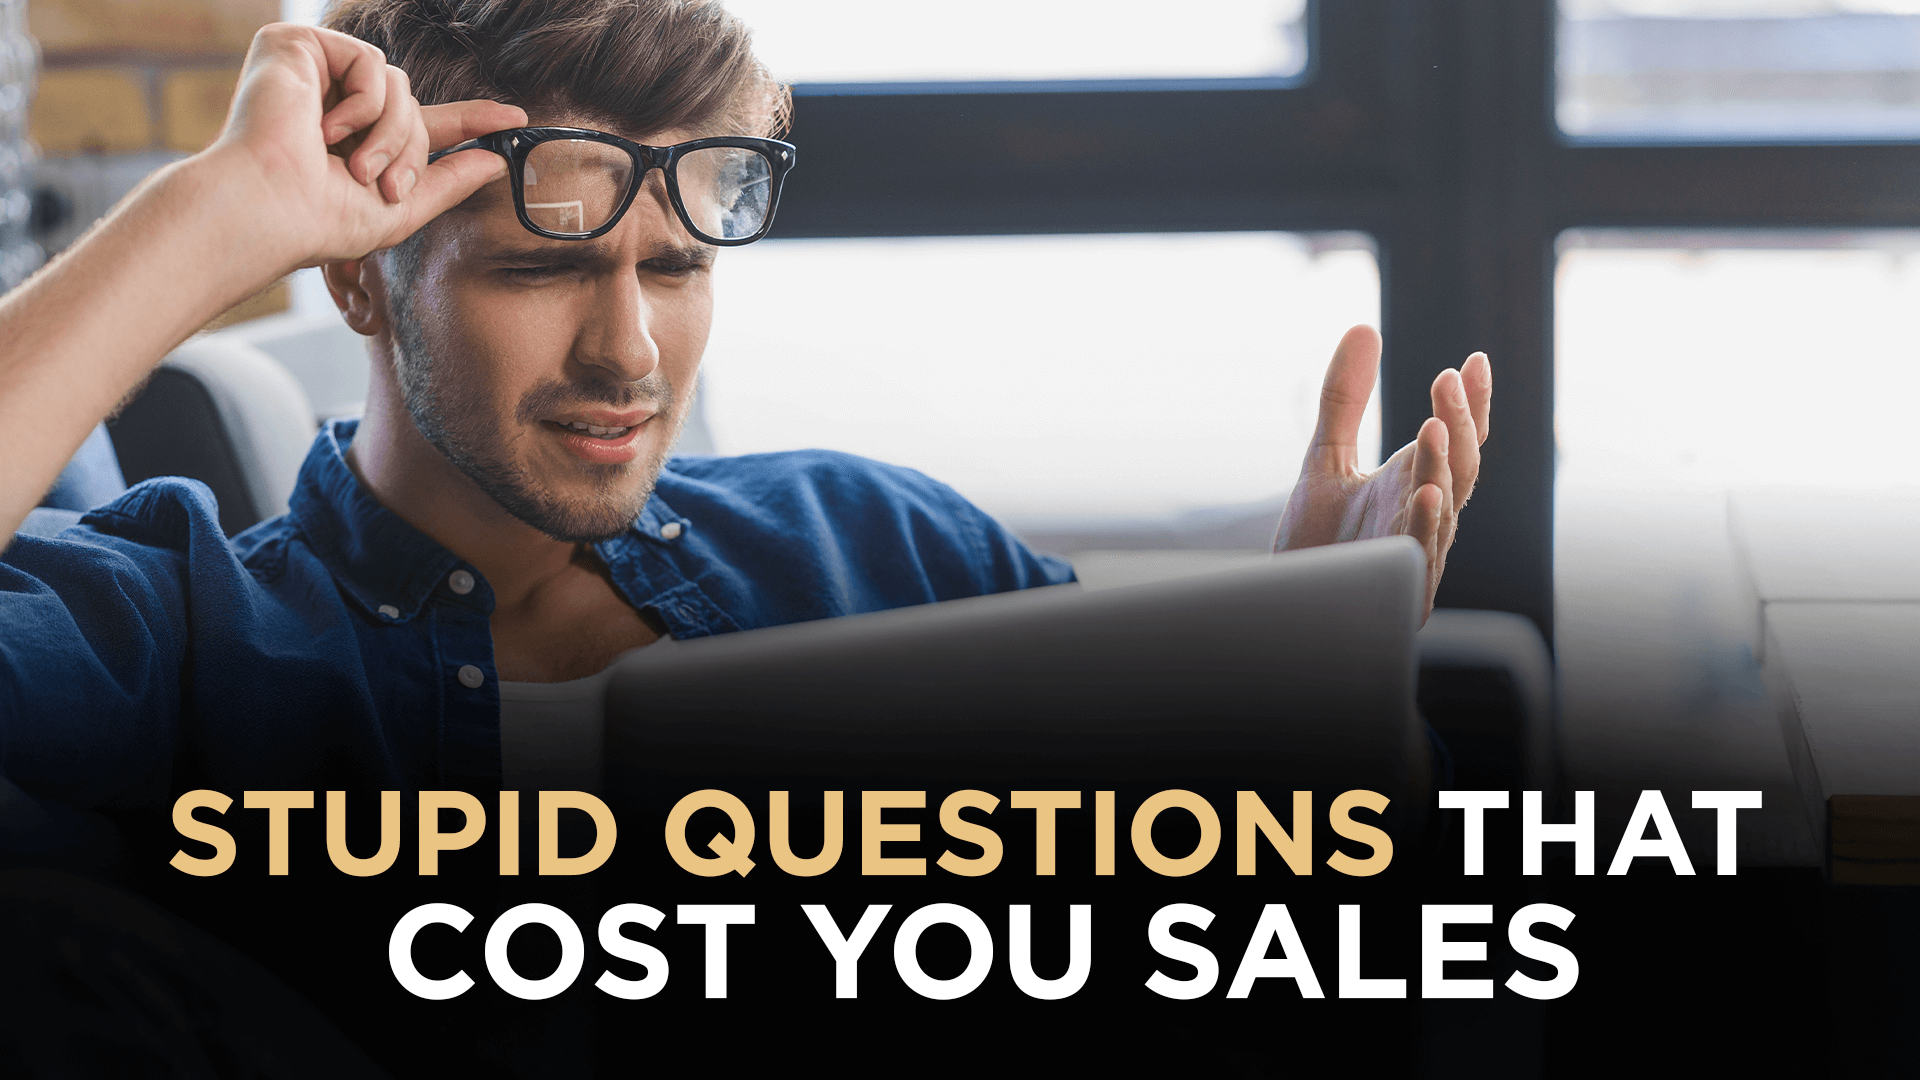 Stupid questions that cost you sales